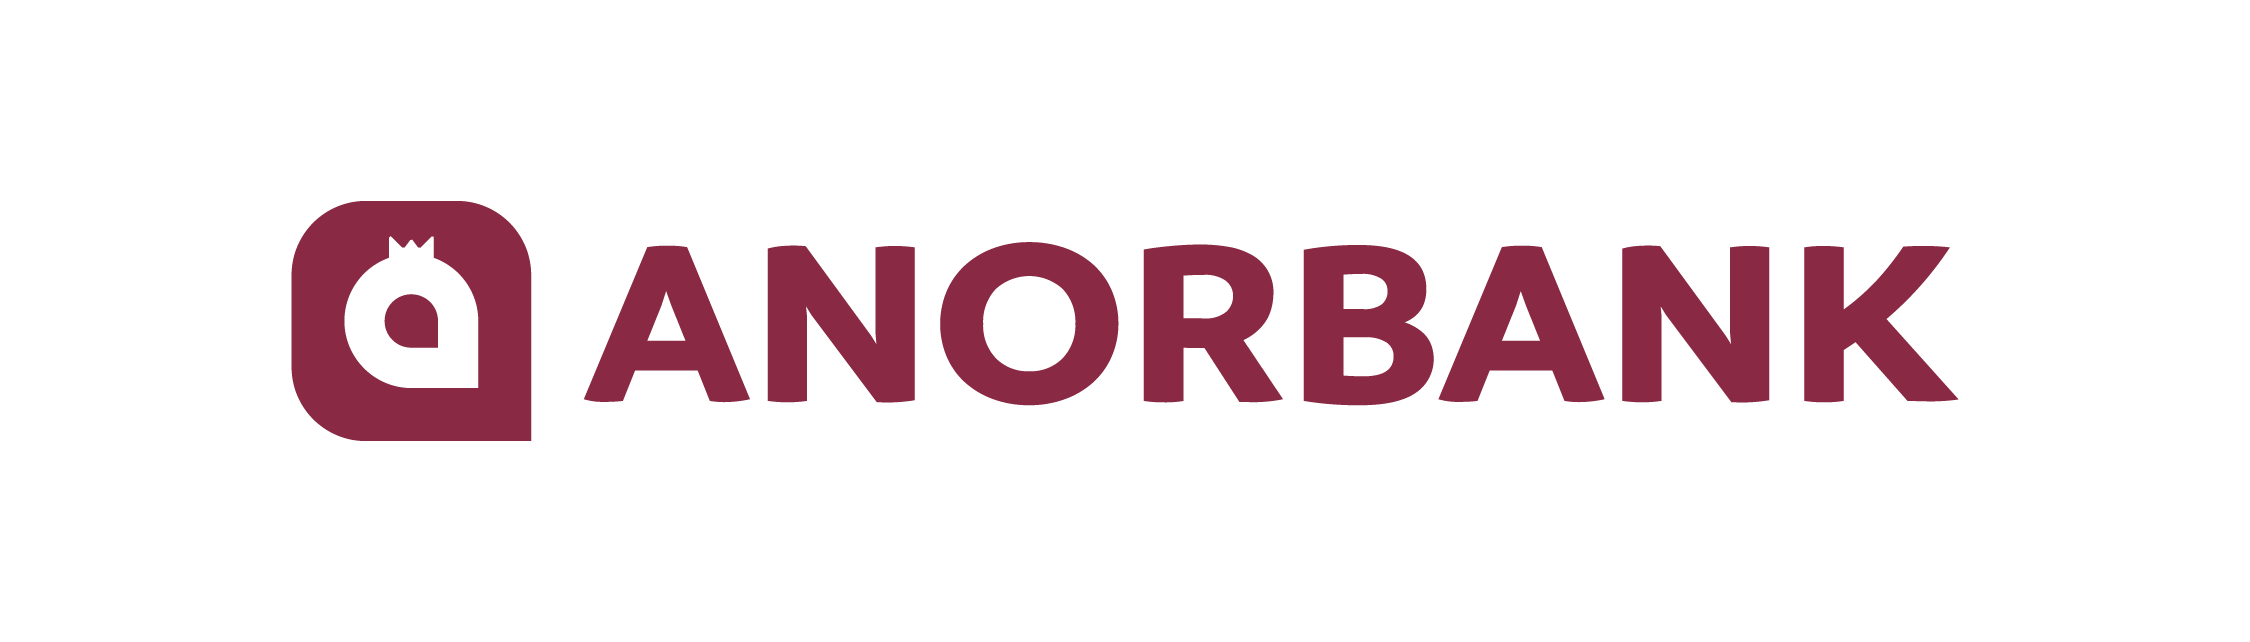 ANORBANK